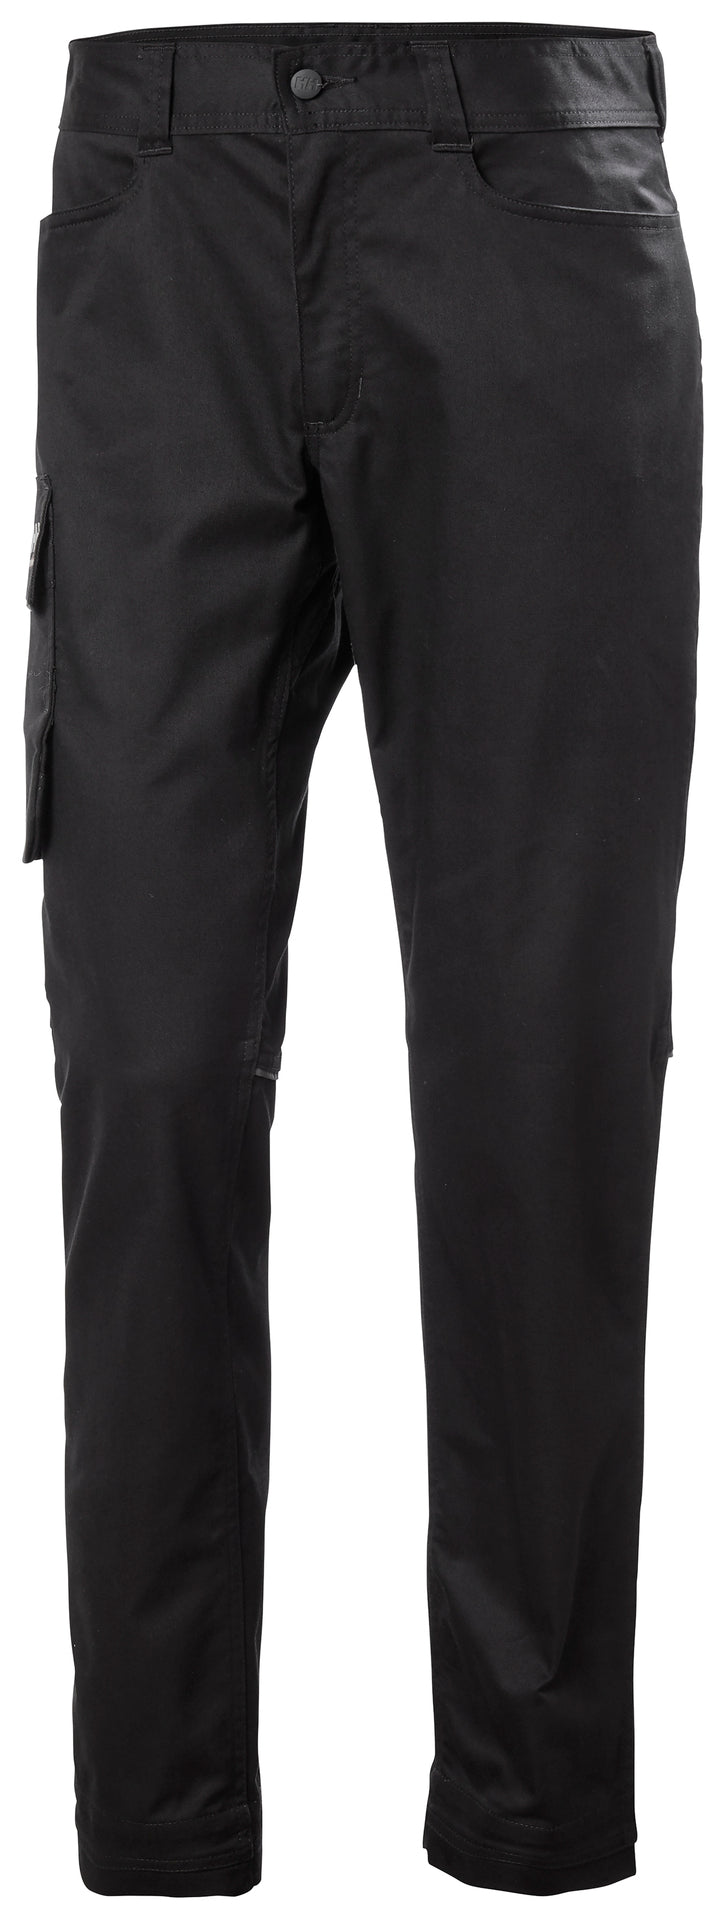 Helly Hansen Manchester Service Trousers - Black